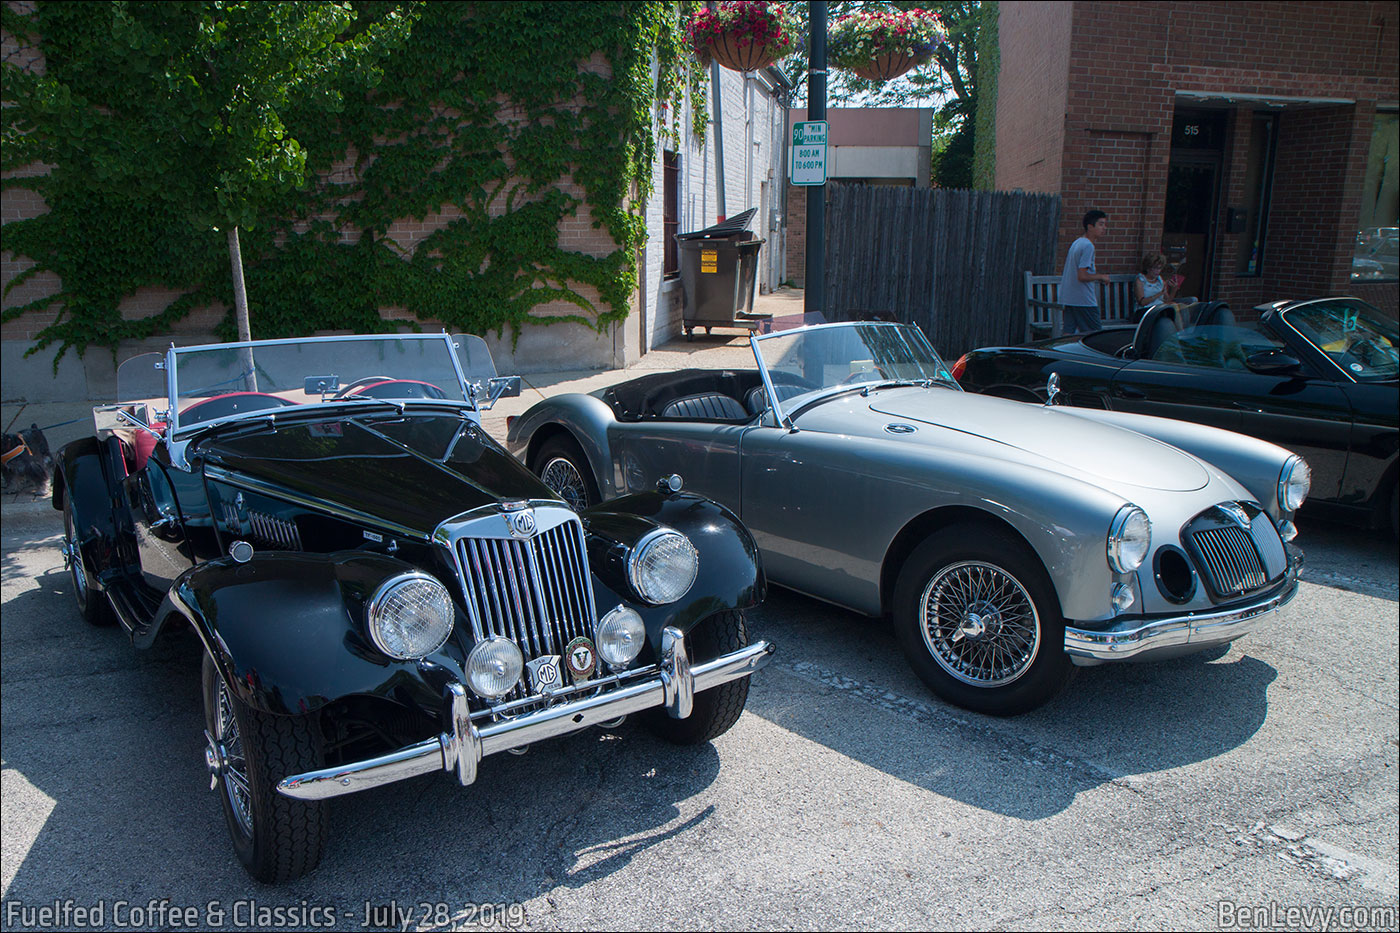 Pair of MGs at Fuelfed Coffee & Classics